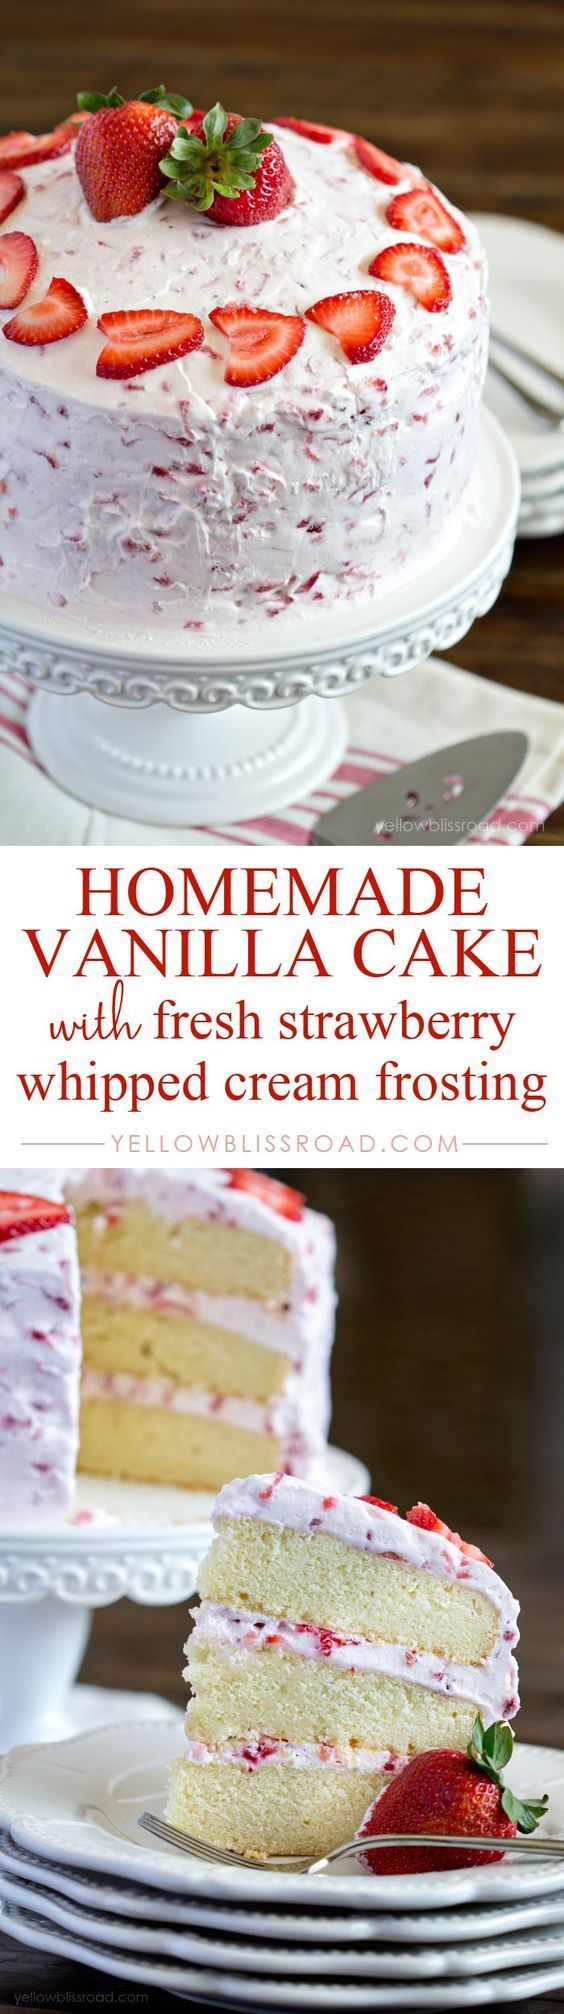 Homemade Vanilla Layer Cake with Fresh Strawberry Whipped Cream Frosting. Looks so good!